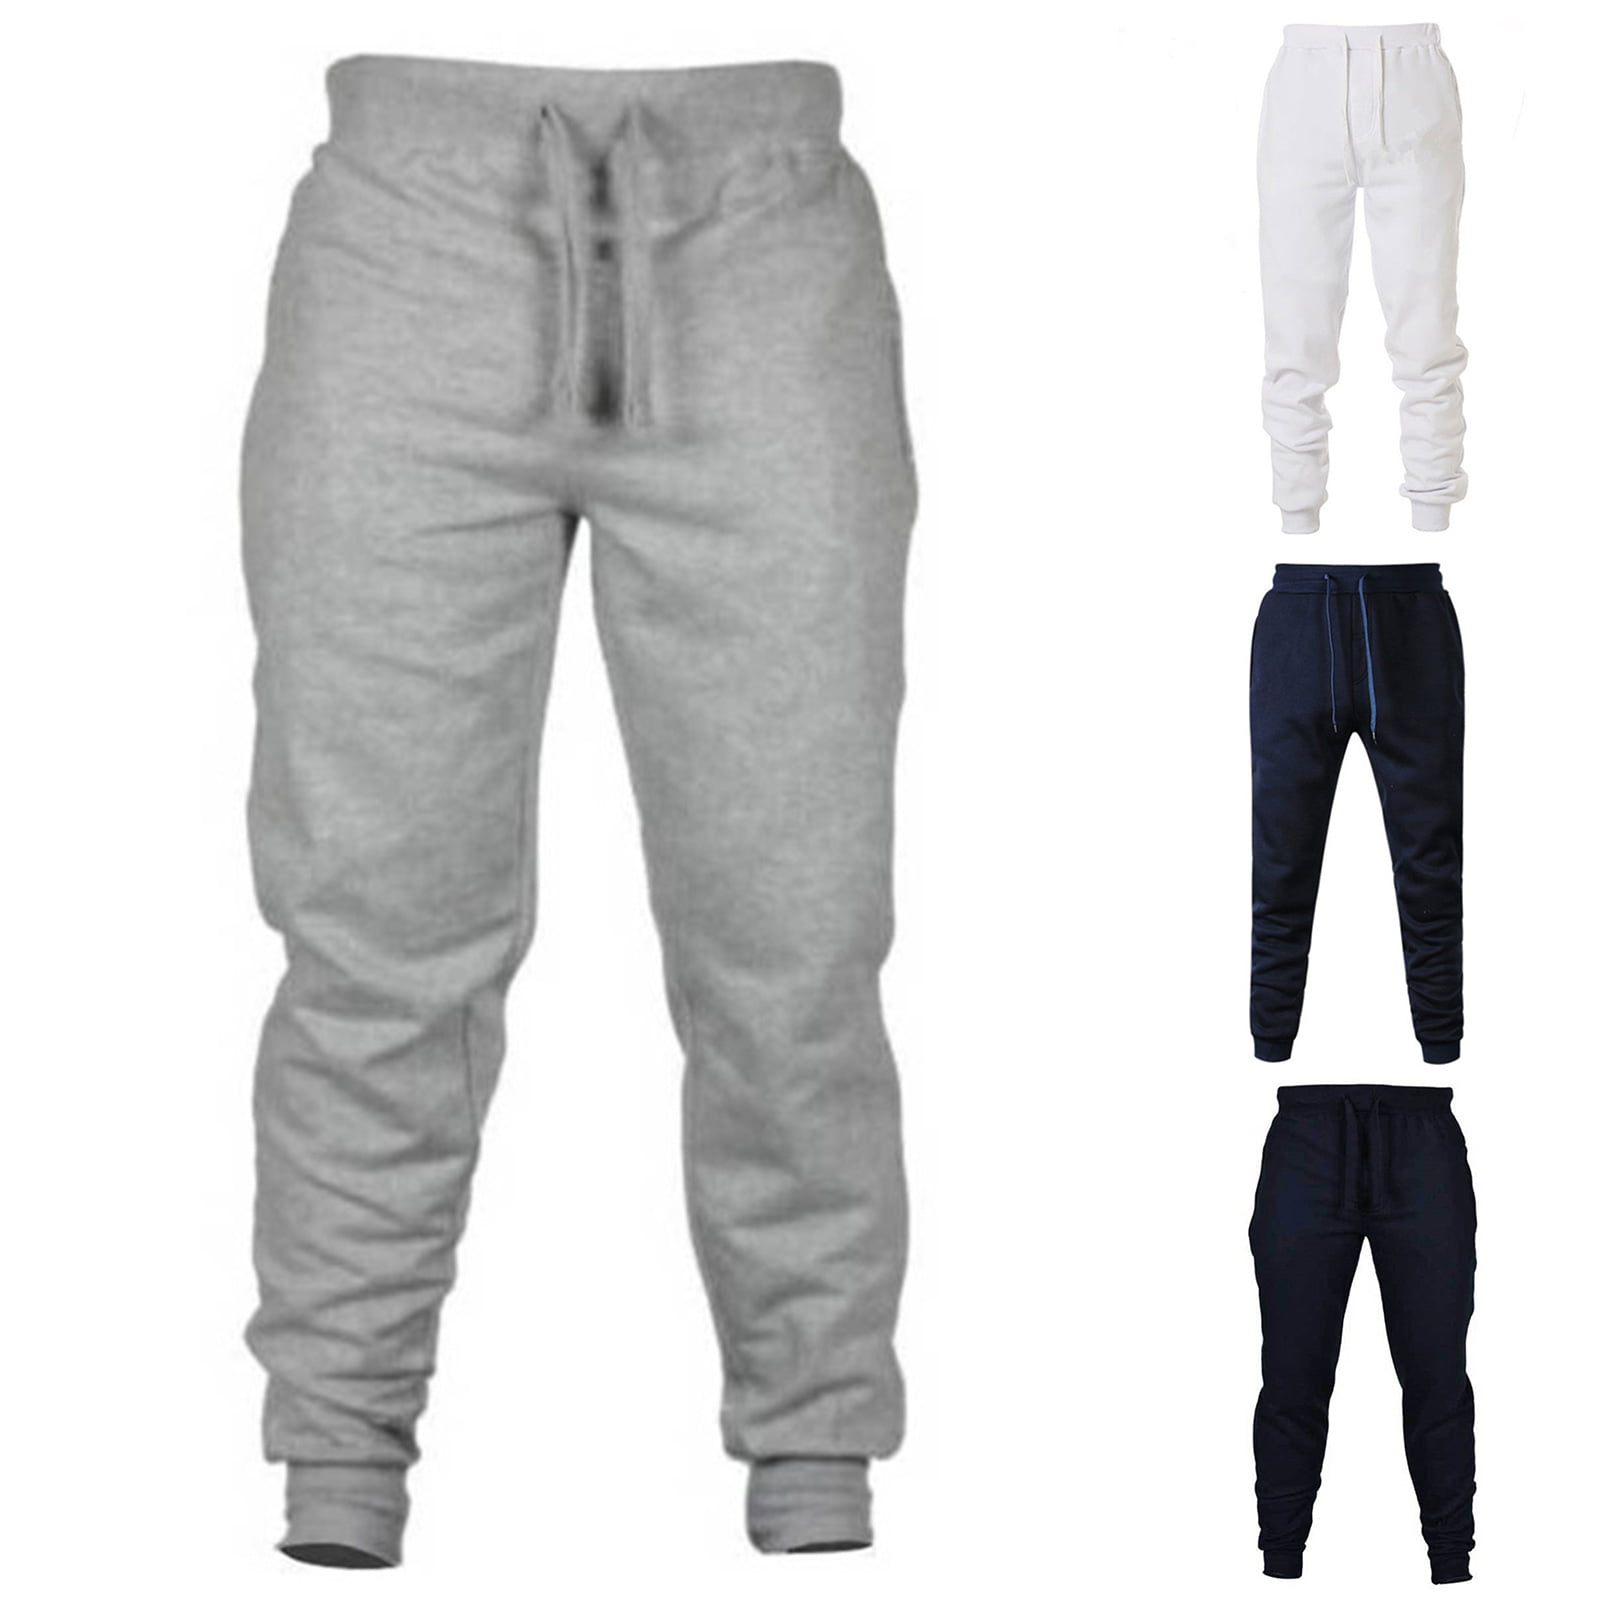 Mens Drawstring Pant with Back Elastic Waistband Sport Pure Color Casual Loose Sweatpants Trousers 